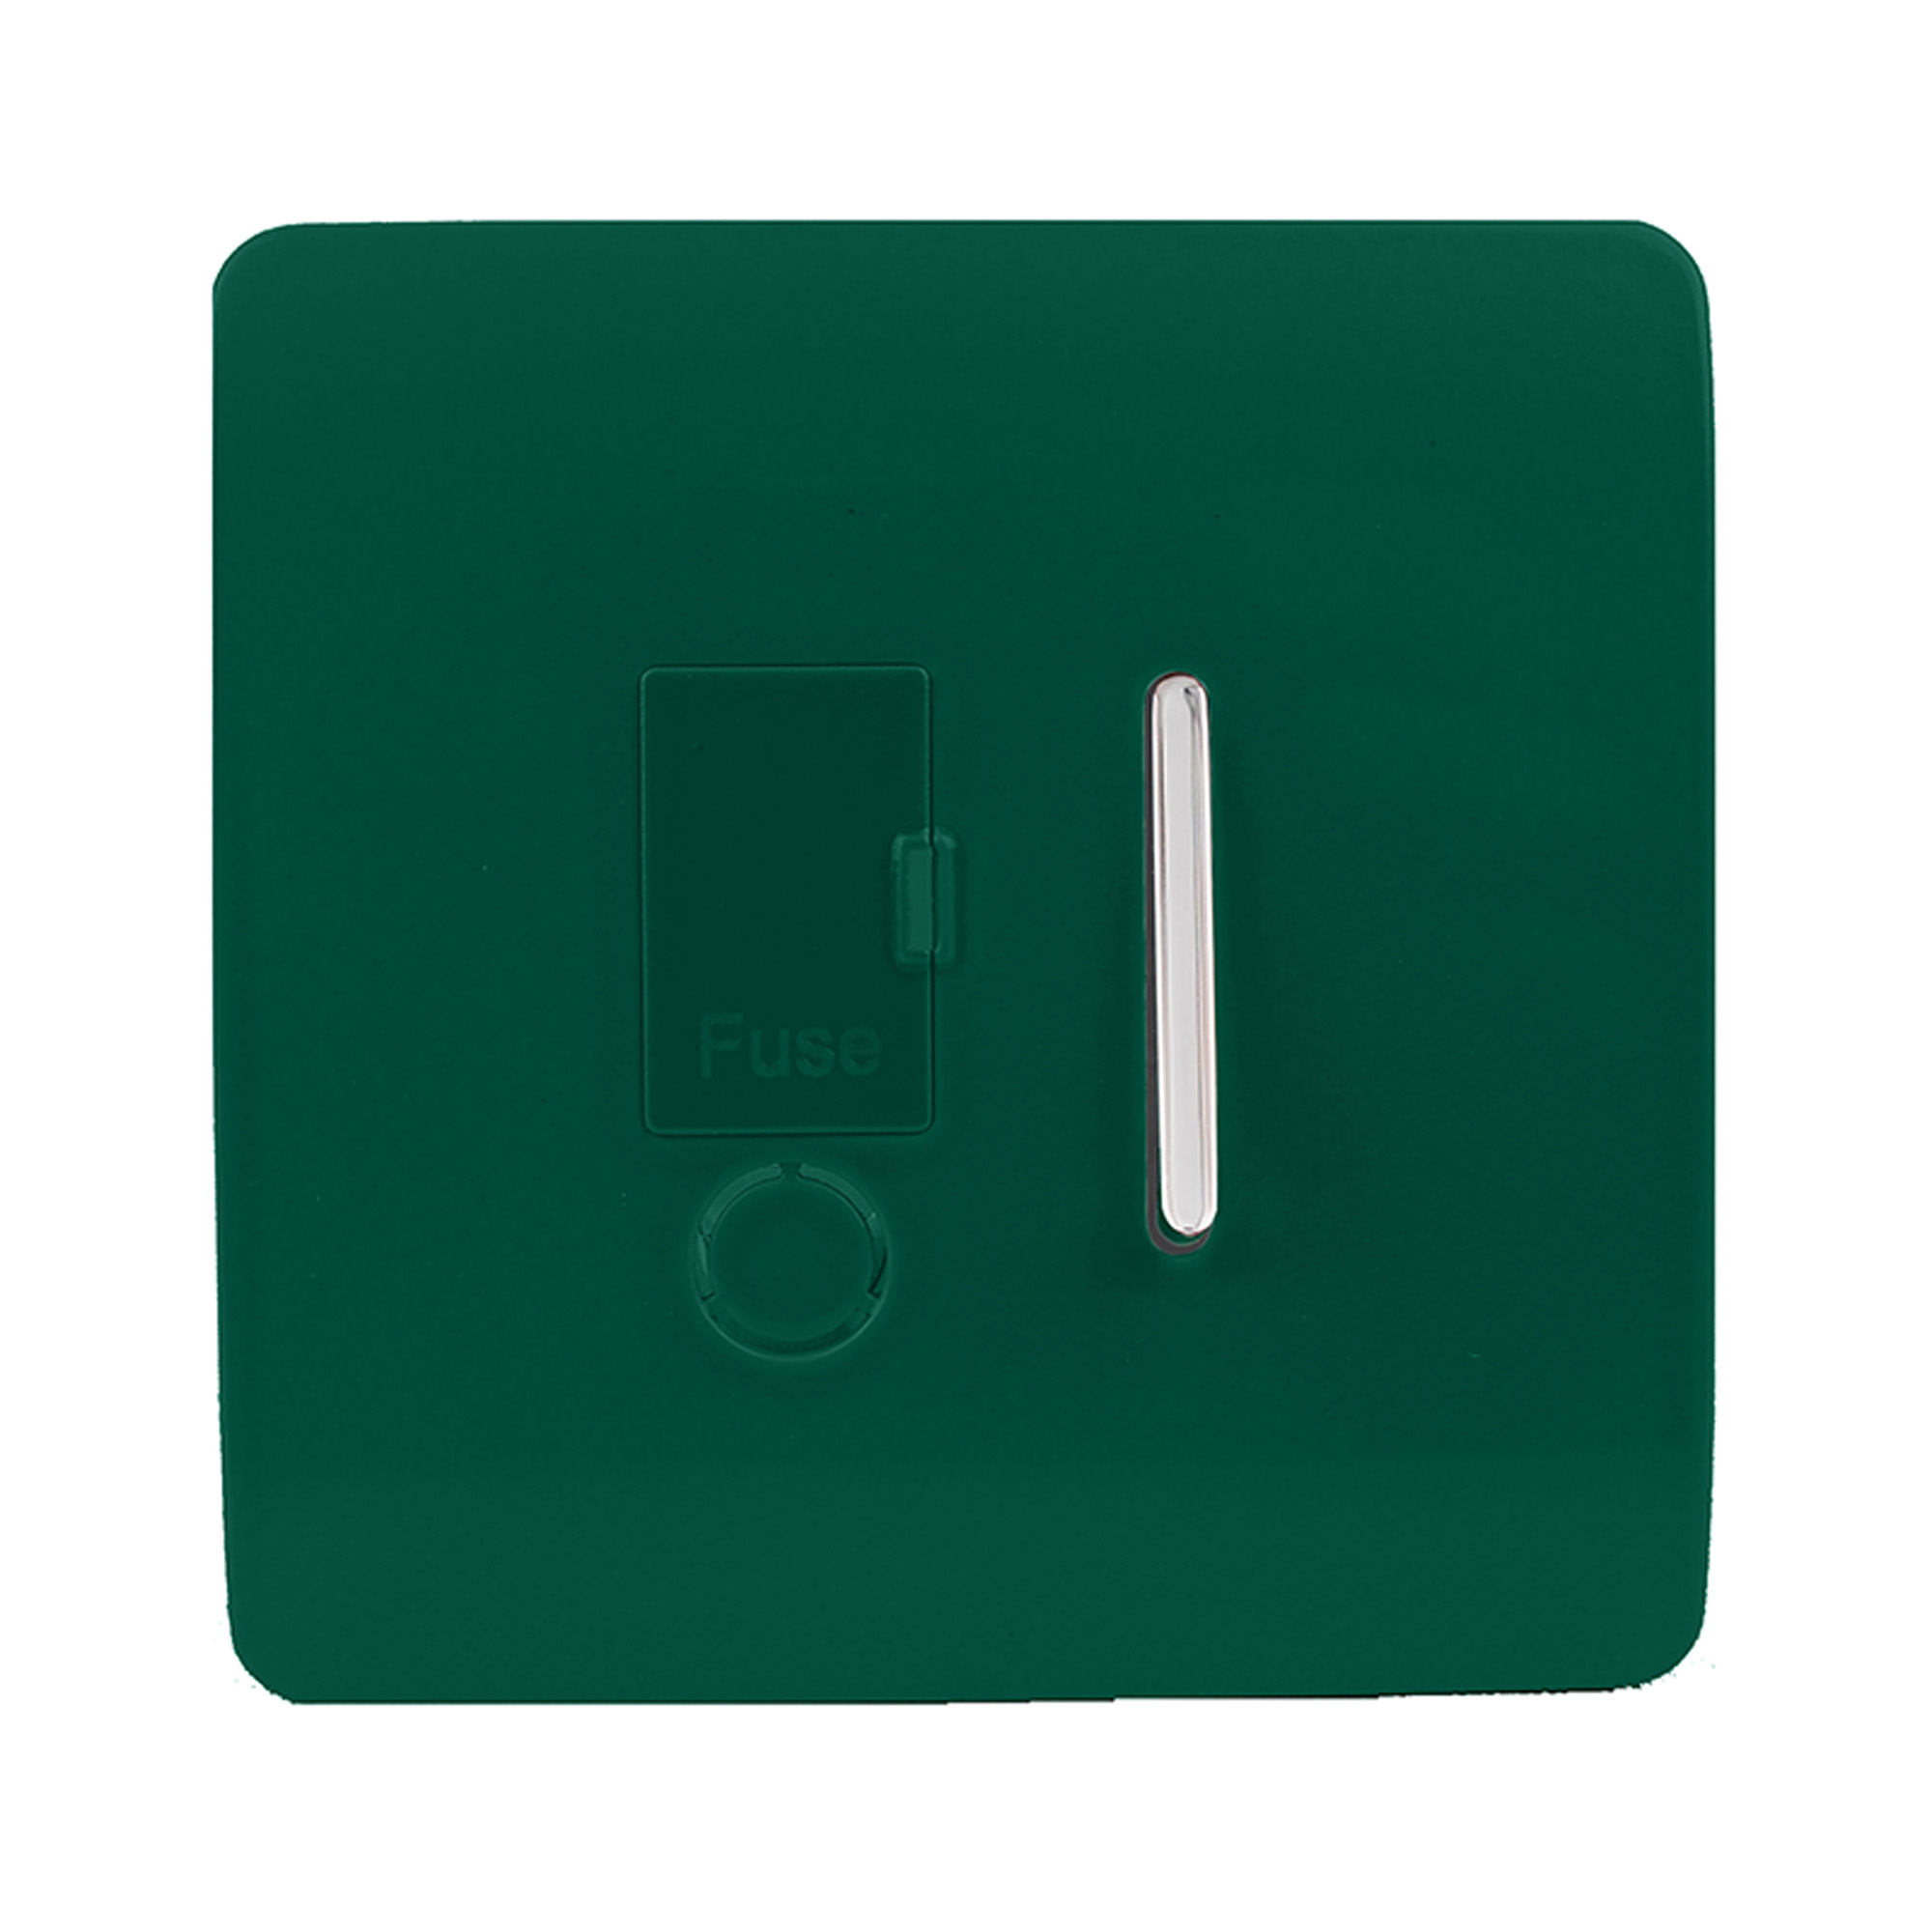 ART-FSDG  Switch Fused Spur 13A With Flex Outlet Dark Green